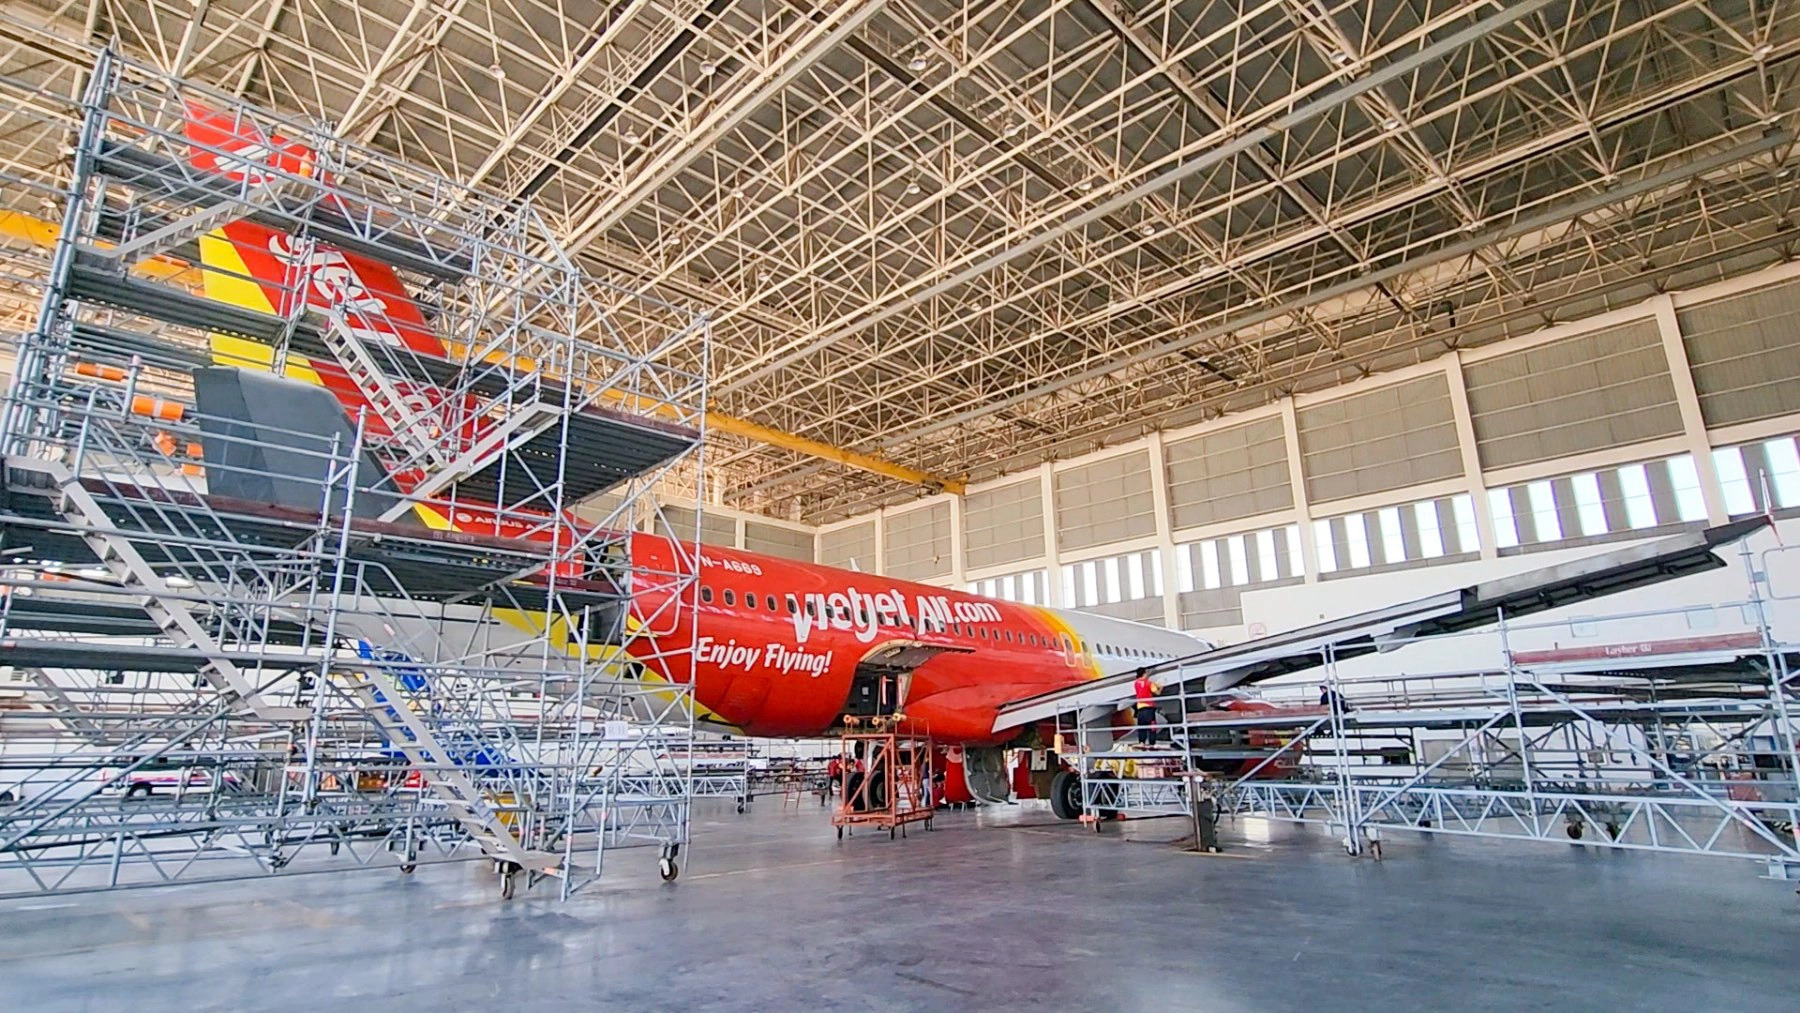 A Vietjet aircraft undergoes a C-check in a hangar meeting international standards at Wattay International Airport in Vientiane, Laos. Photo: Tuoi Tre